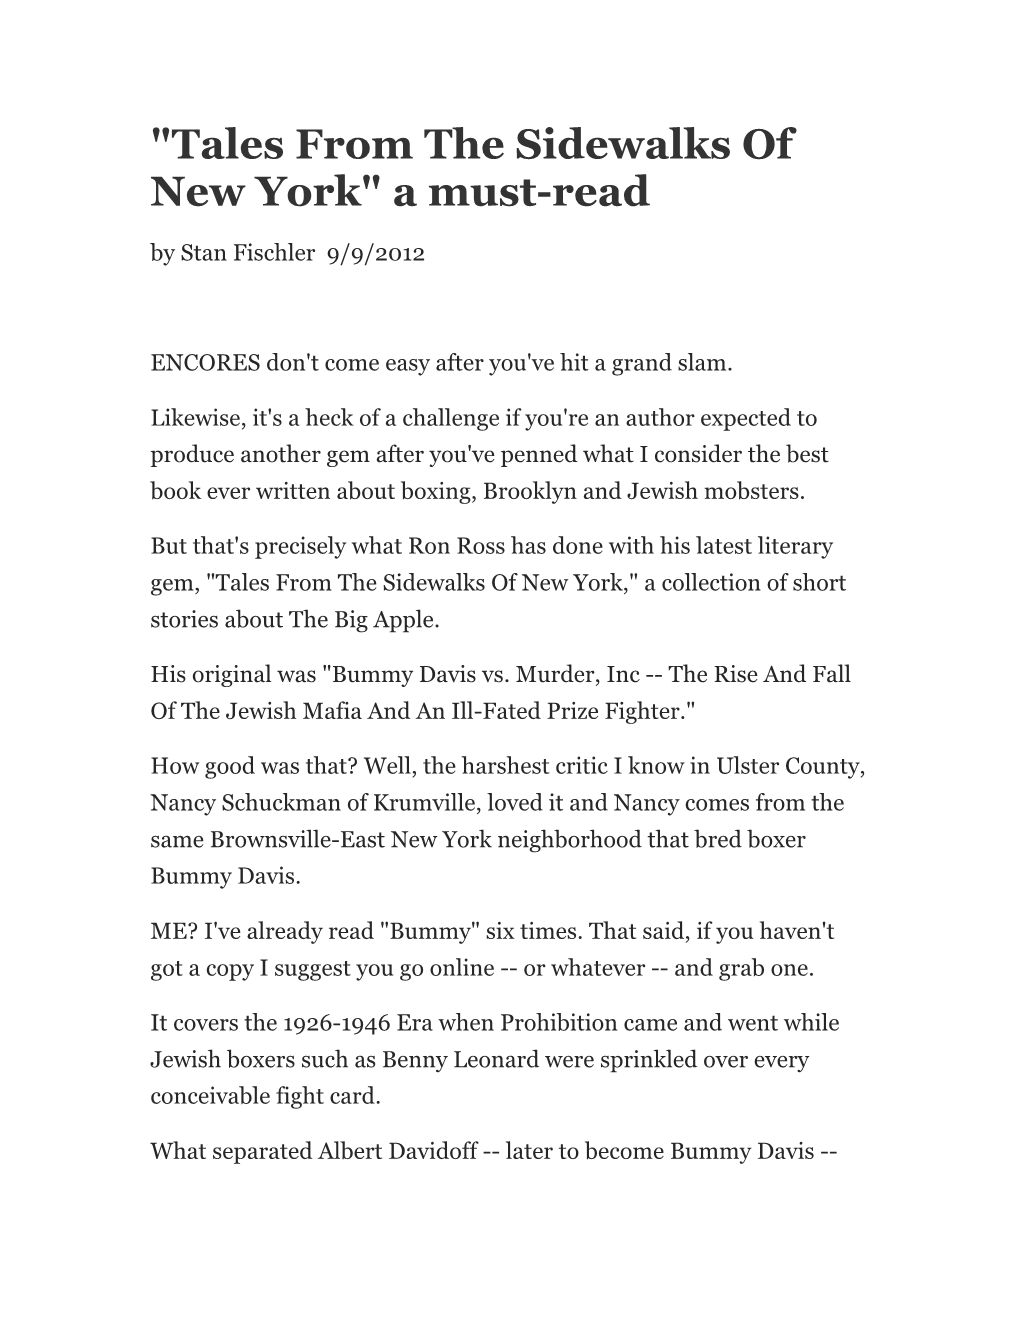 "Tales from the Sidewalks of New York" a Must-Read by Stan Fischler 9/9/2012